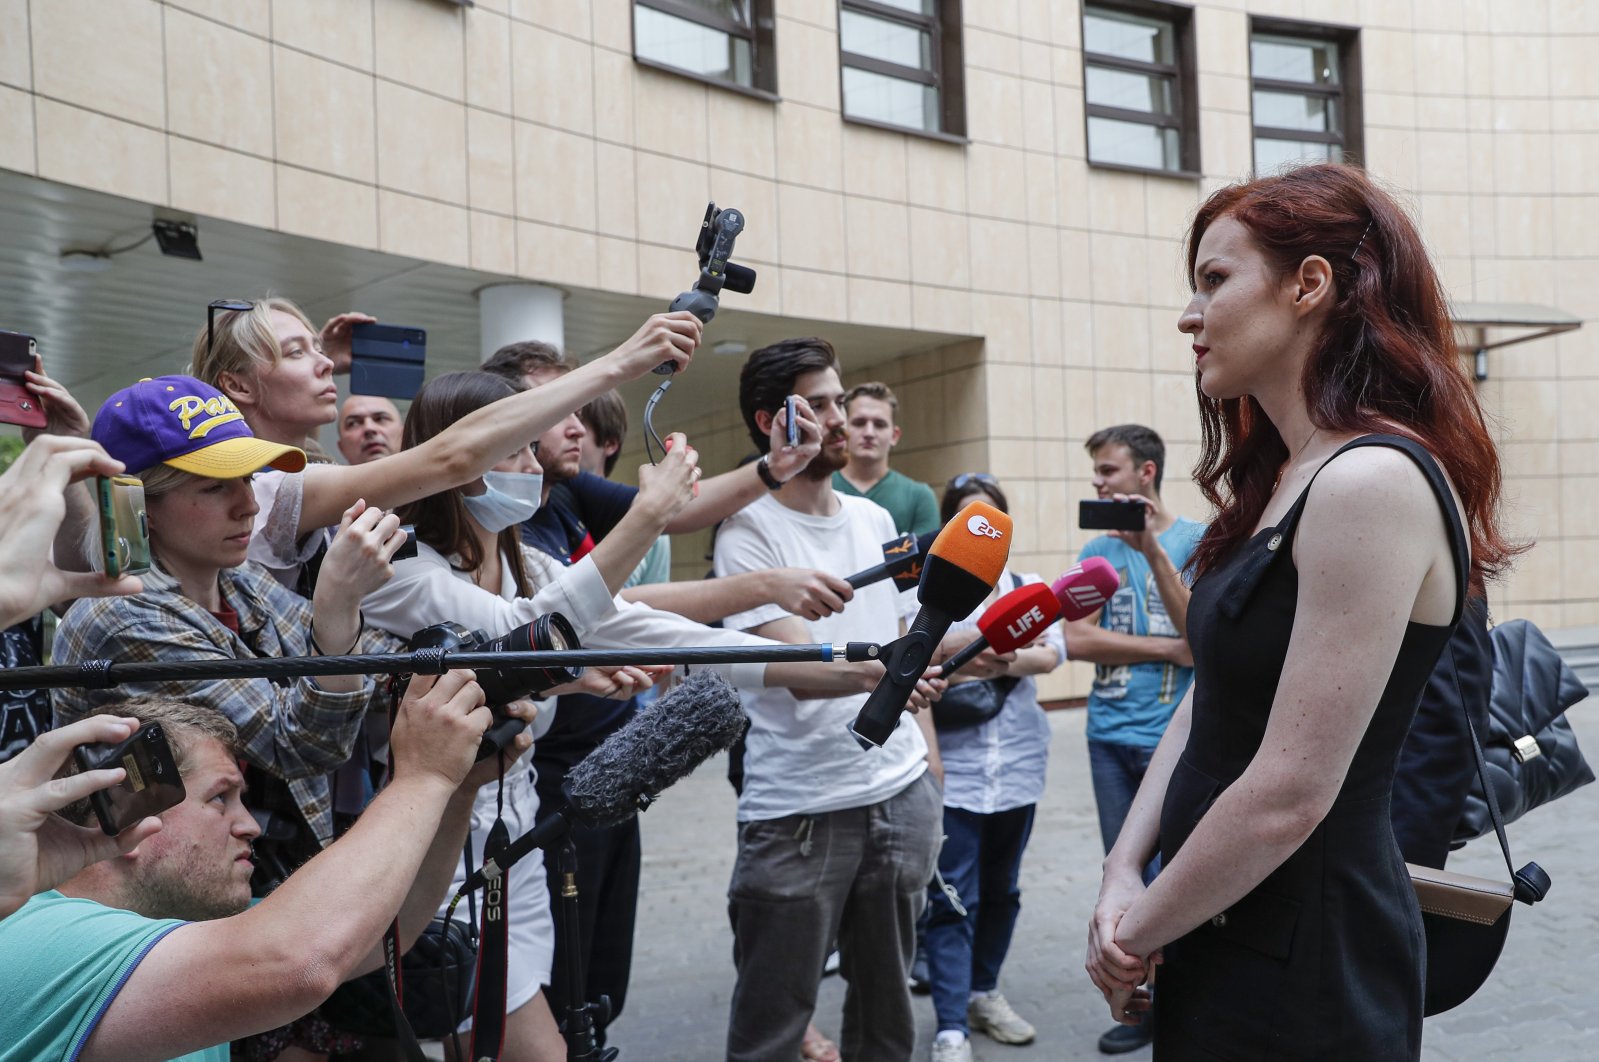 Alexei Navalny's spokesperson Kira Yarmysh (R) speaks to journalists while leaving the Preobrazhensky district court after a hearing in Moscow, Russia, Aug. 16, 2021. (EPA Photo / Maxim Shipenkov)